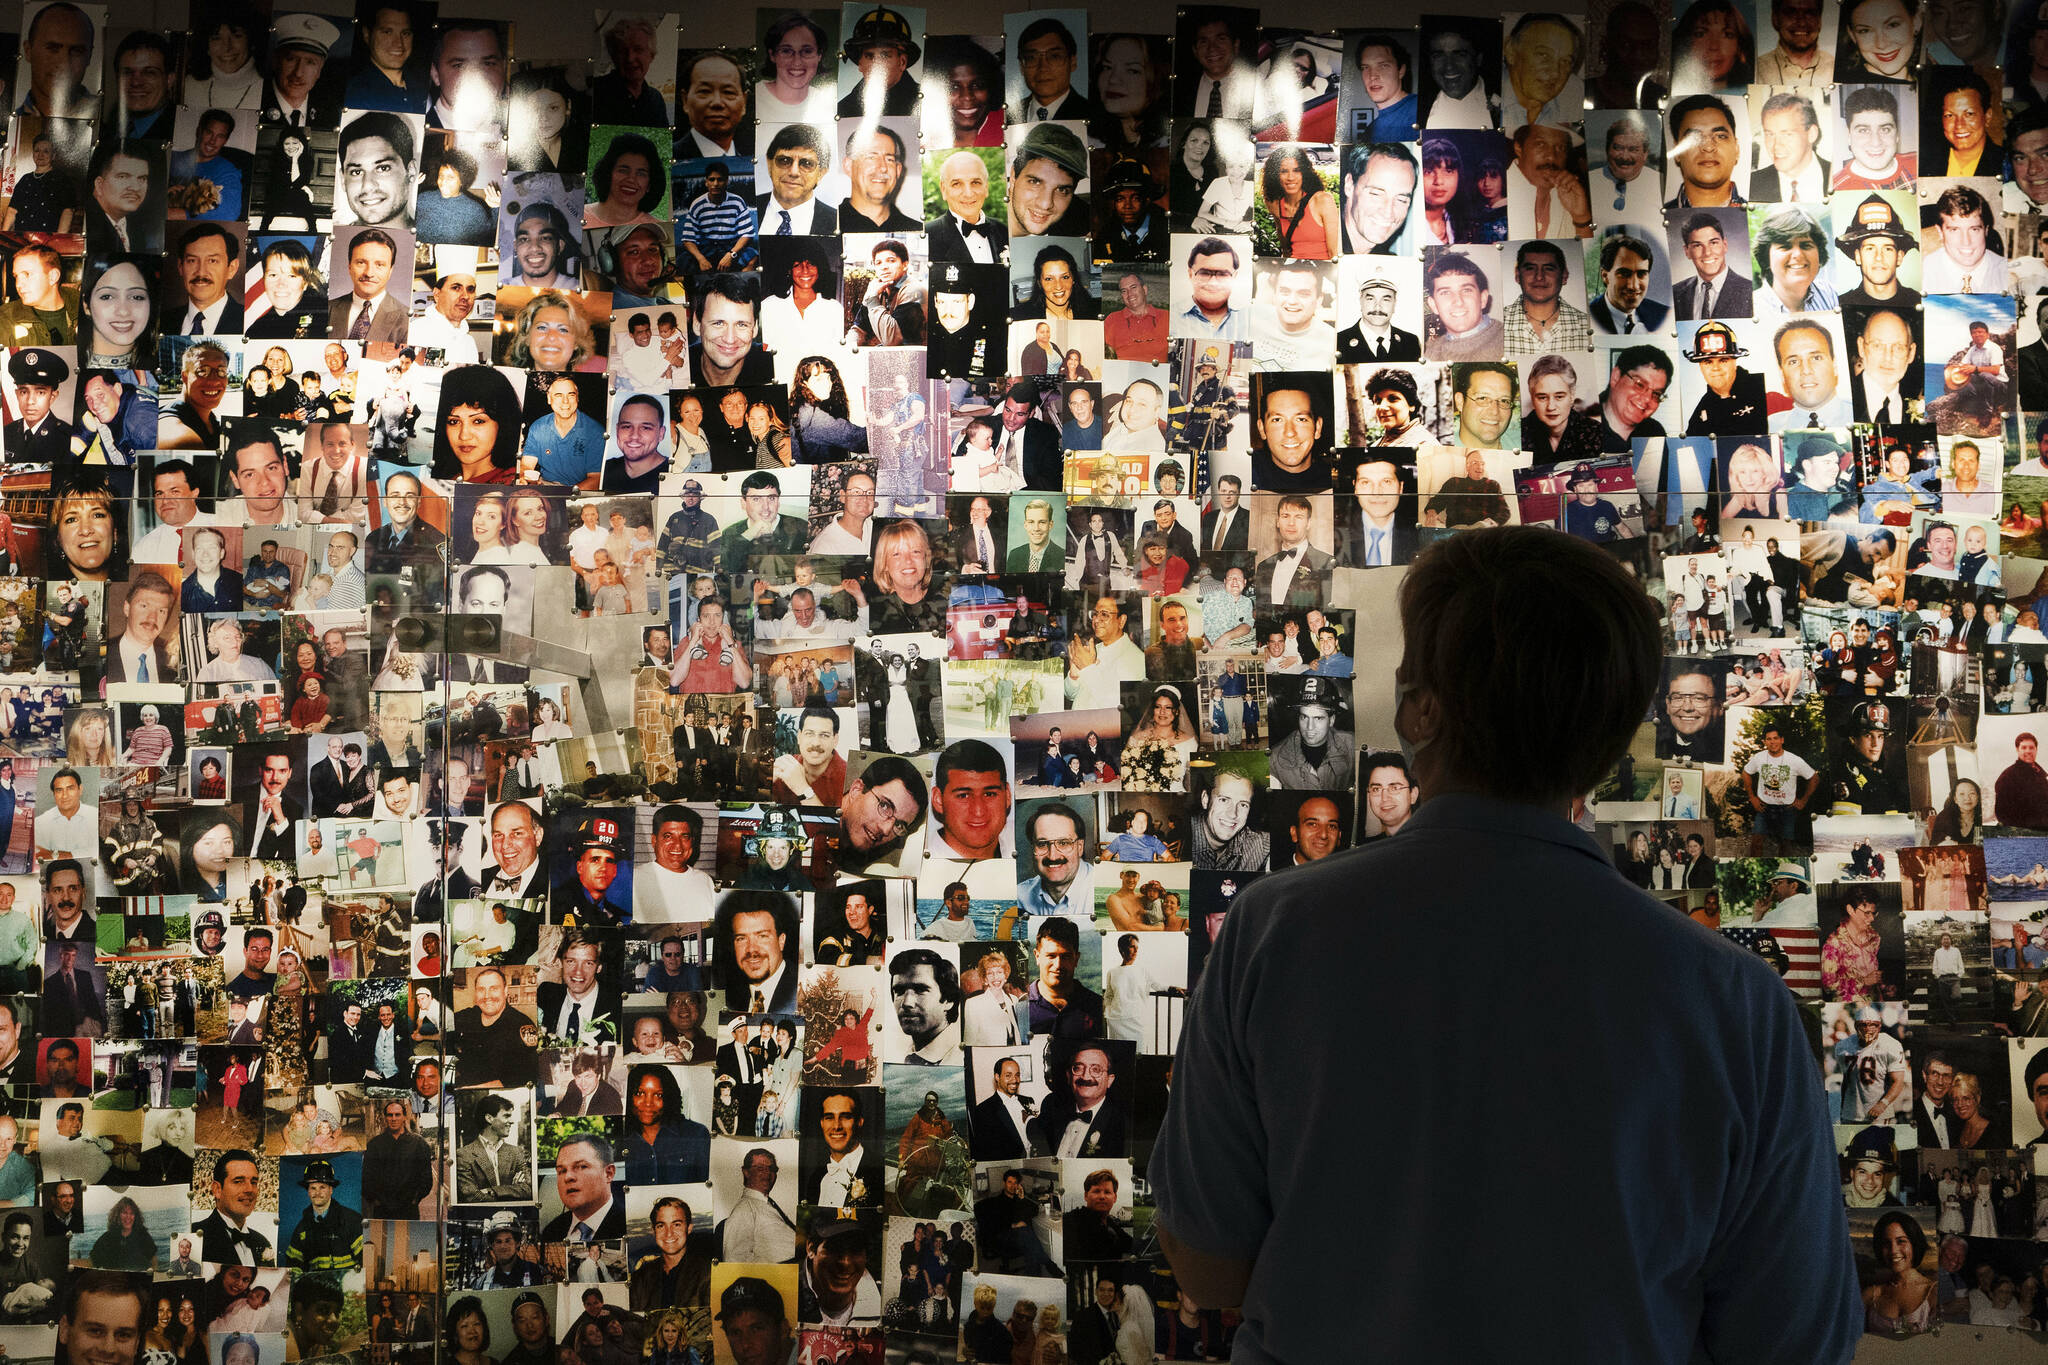 Désirée Bouchat, a survivor of the 9/11 attacks on the World Trade Center, looks at photos of those who perished, in a display at the 9/11 Tribute Museum, Friday, Aug. 6, 2021, in New York. While Sept. 11 was a day of carnage, it also was a story of survival: Nearly 3,000 people were killed, but an estimated 33,000 or more people evacuated the World Trade Center and Pentagon. (AP Photo/Mark Lennihan)